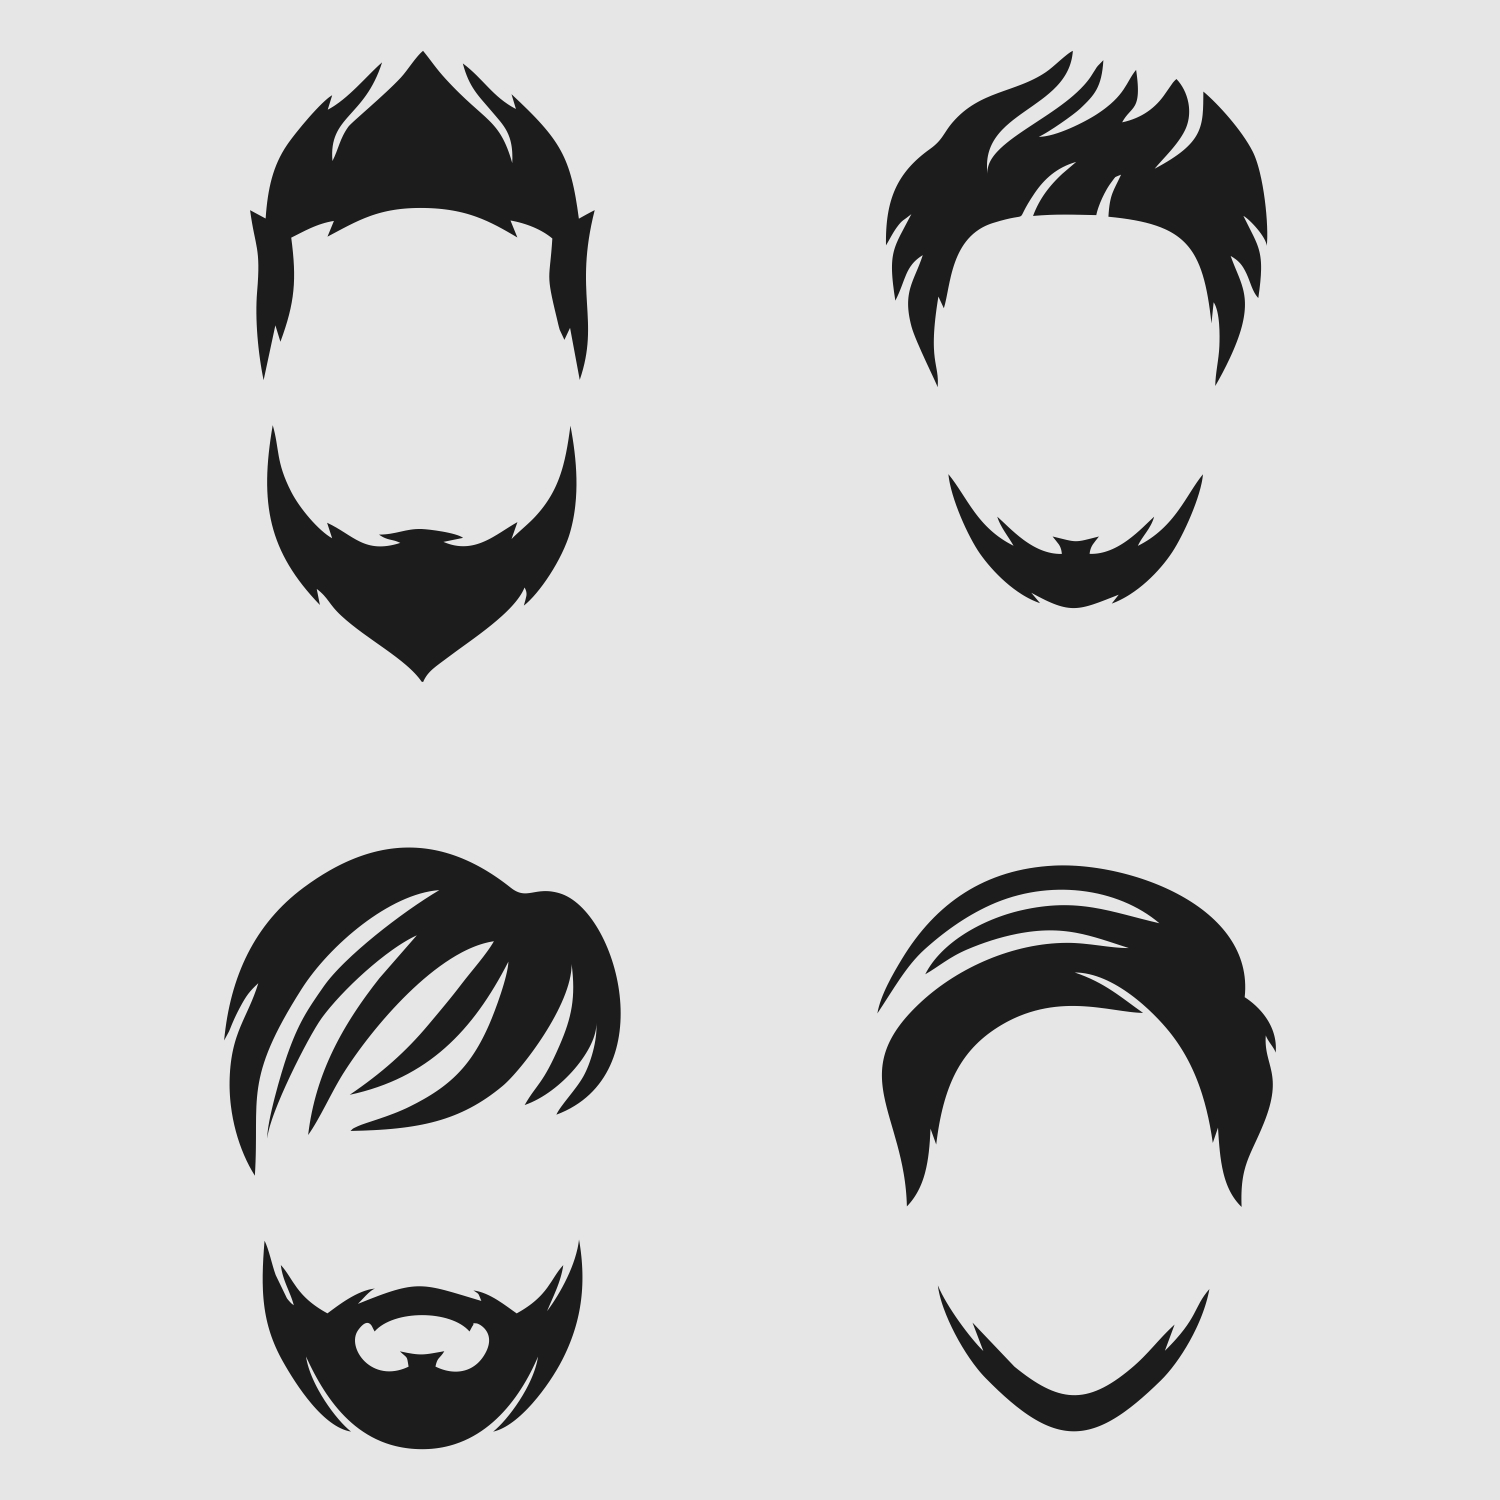 Free vector beard and hair designs CDR file download now